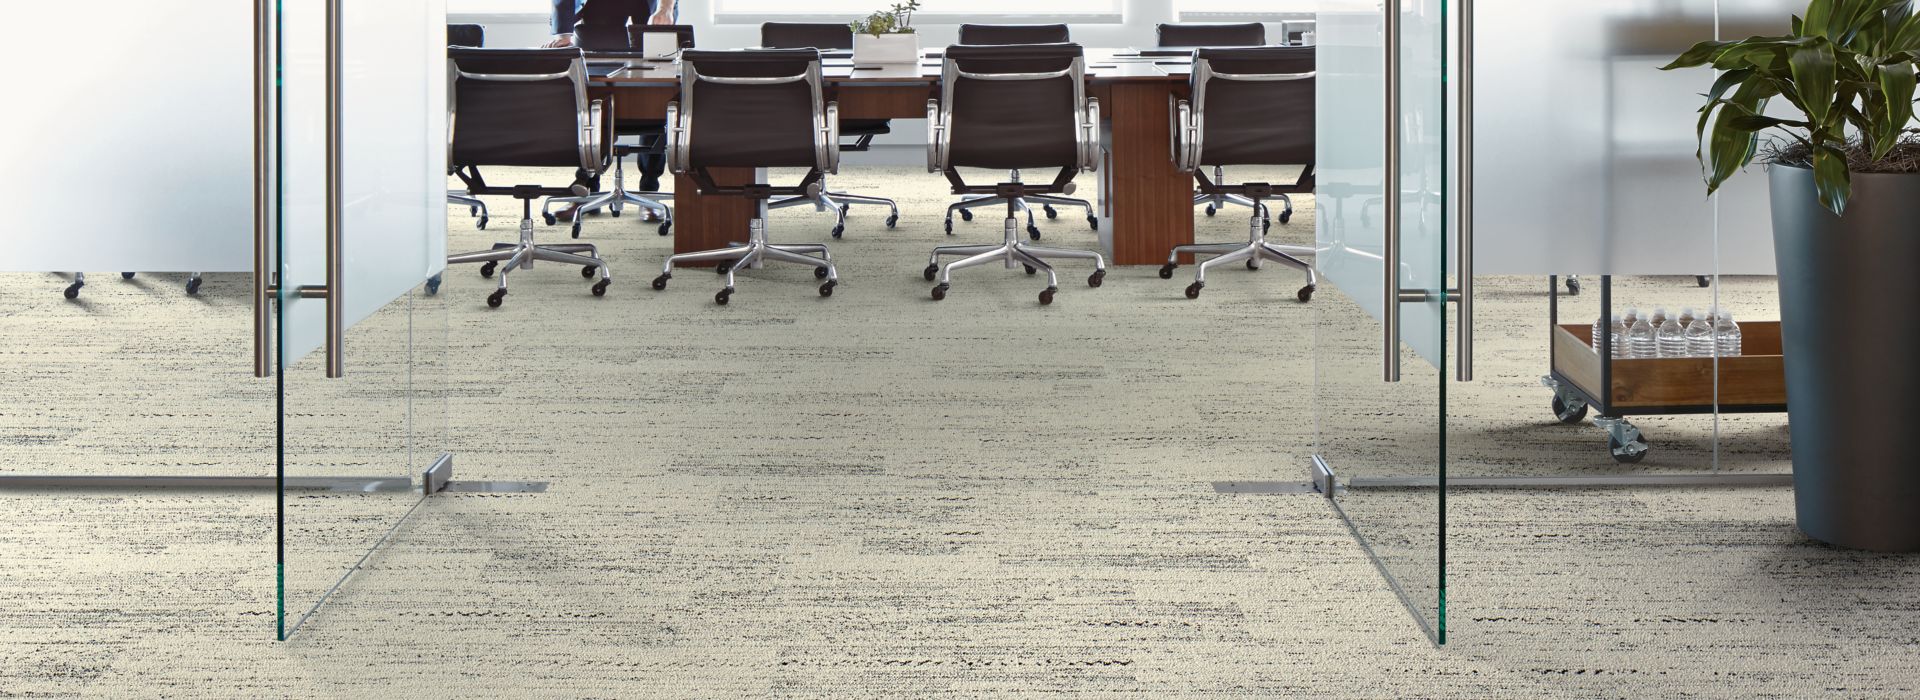 Interface Darning plank carpet tile in meeting area  image number 2